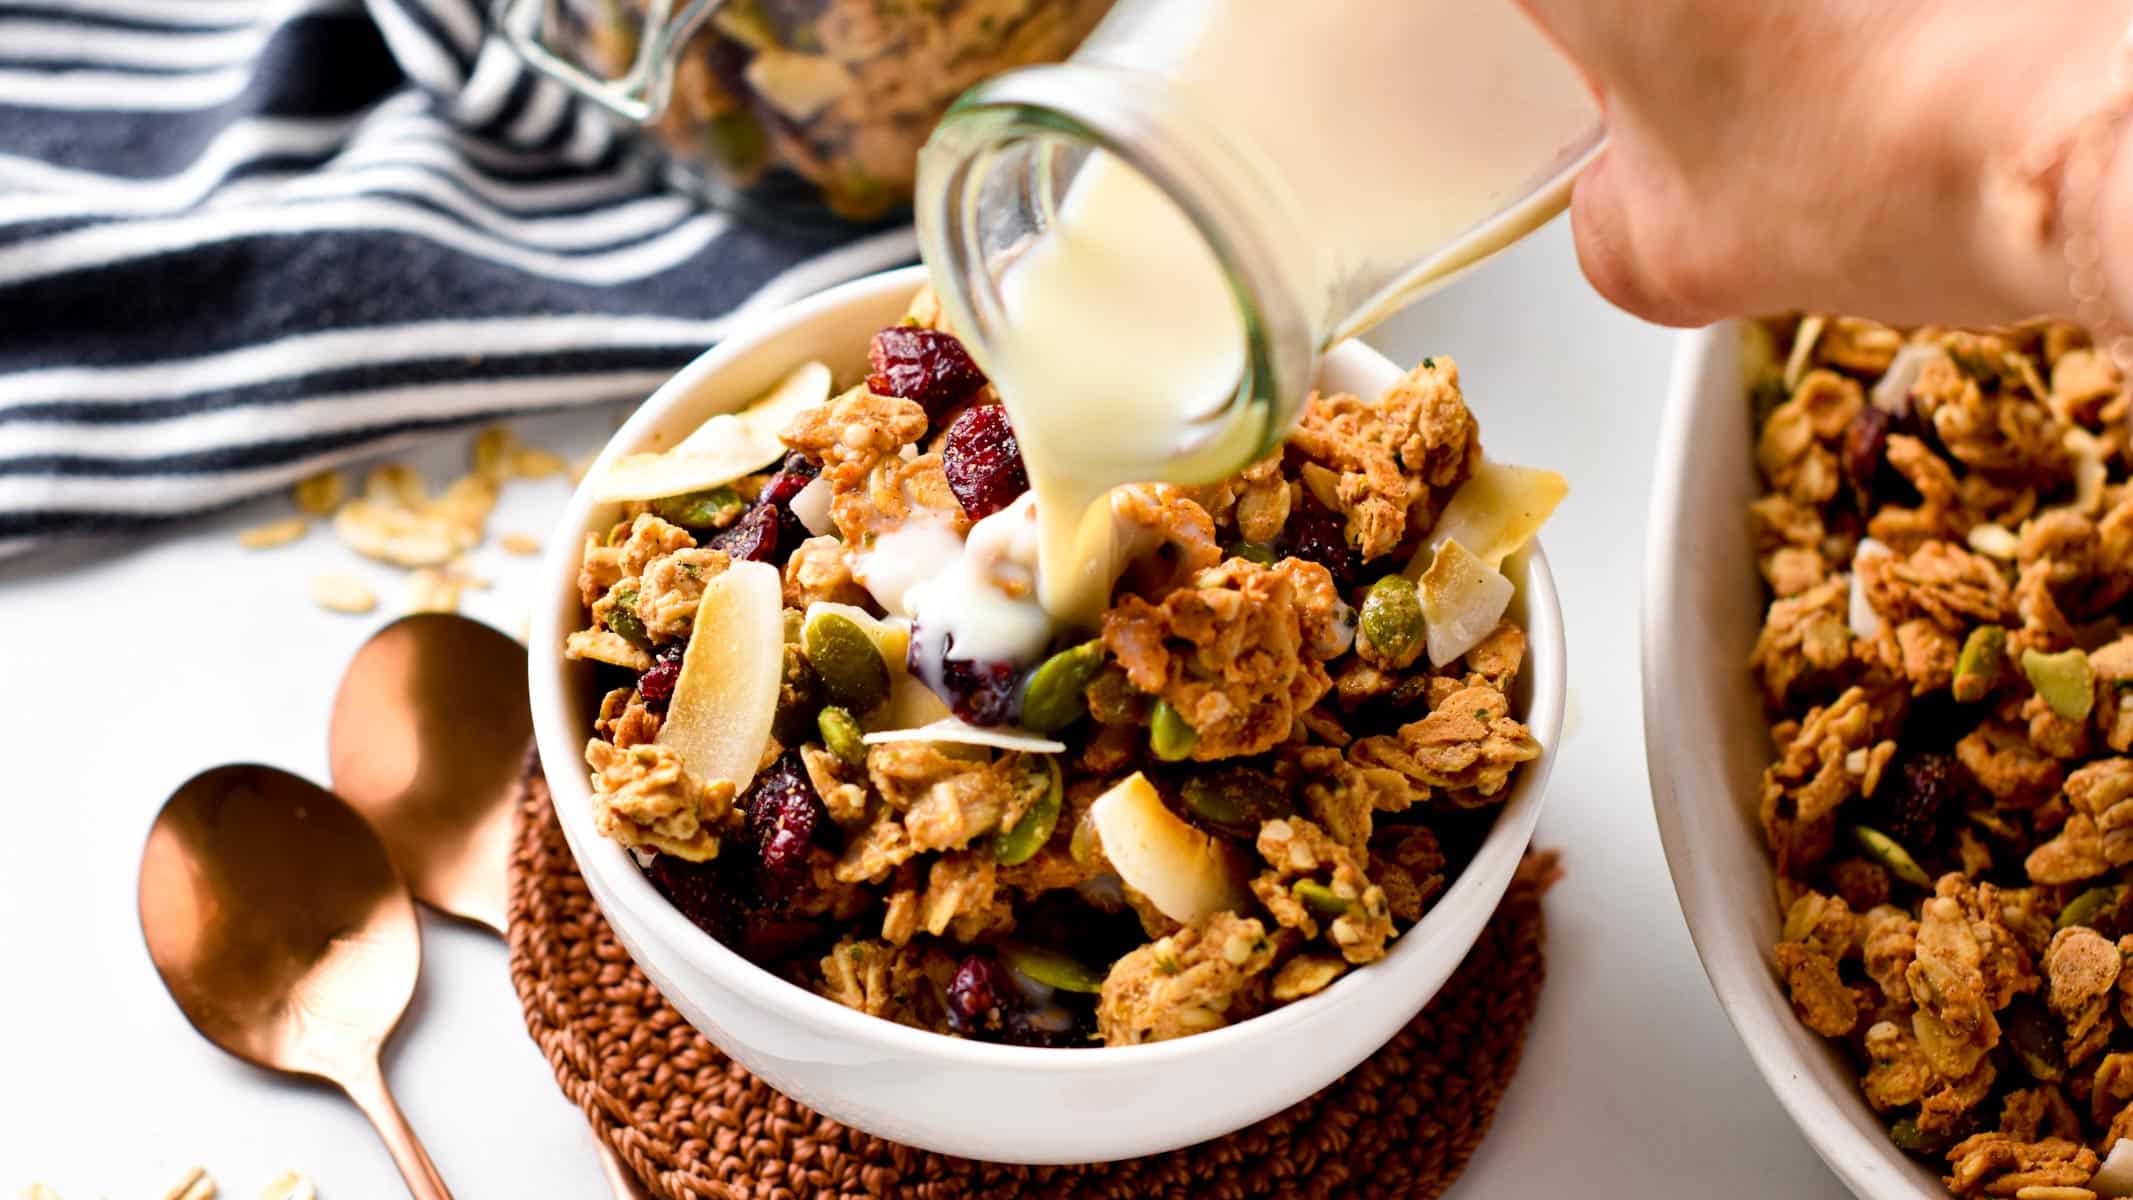 This homemade high protein granola recipe is the most easy high protein breakfast cereal you will ever make! They are crunchy, sweet but also naturally vegan, nut-free and refined sugar-free.